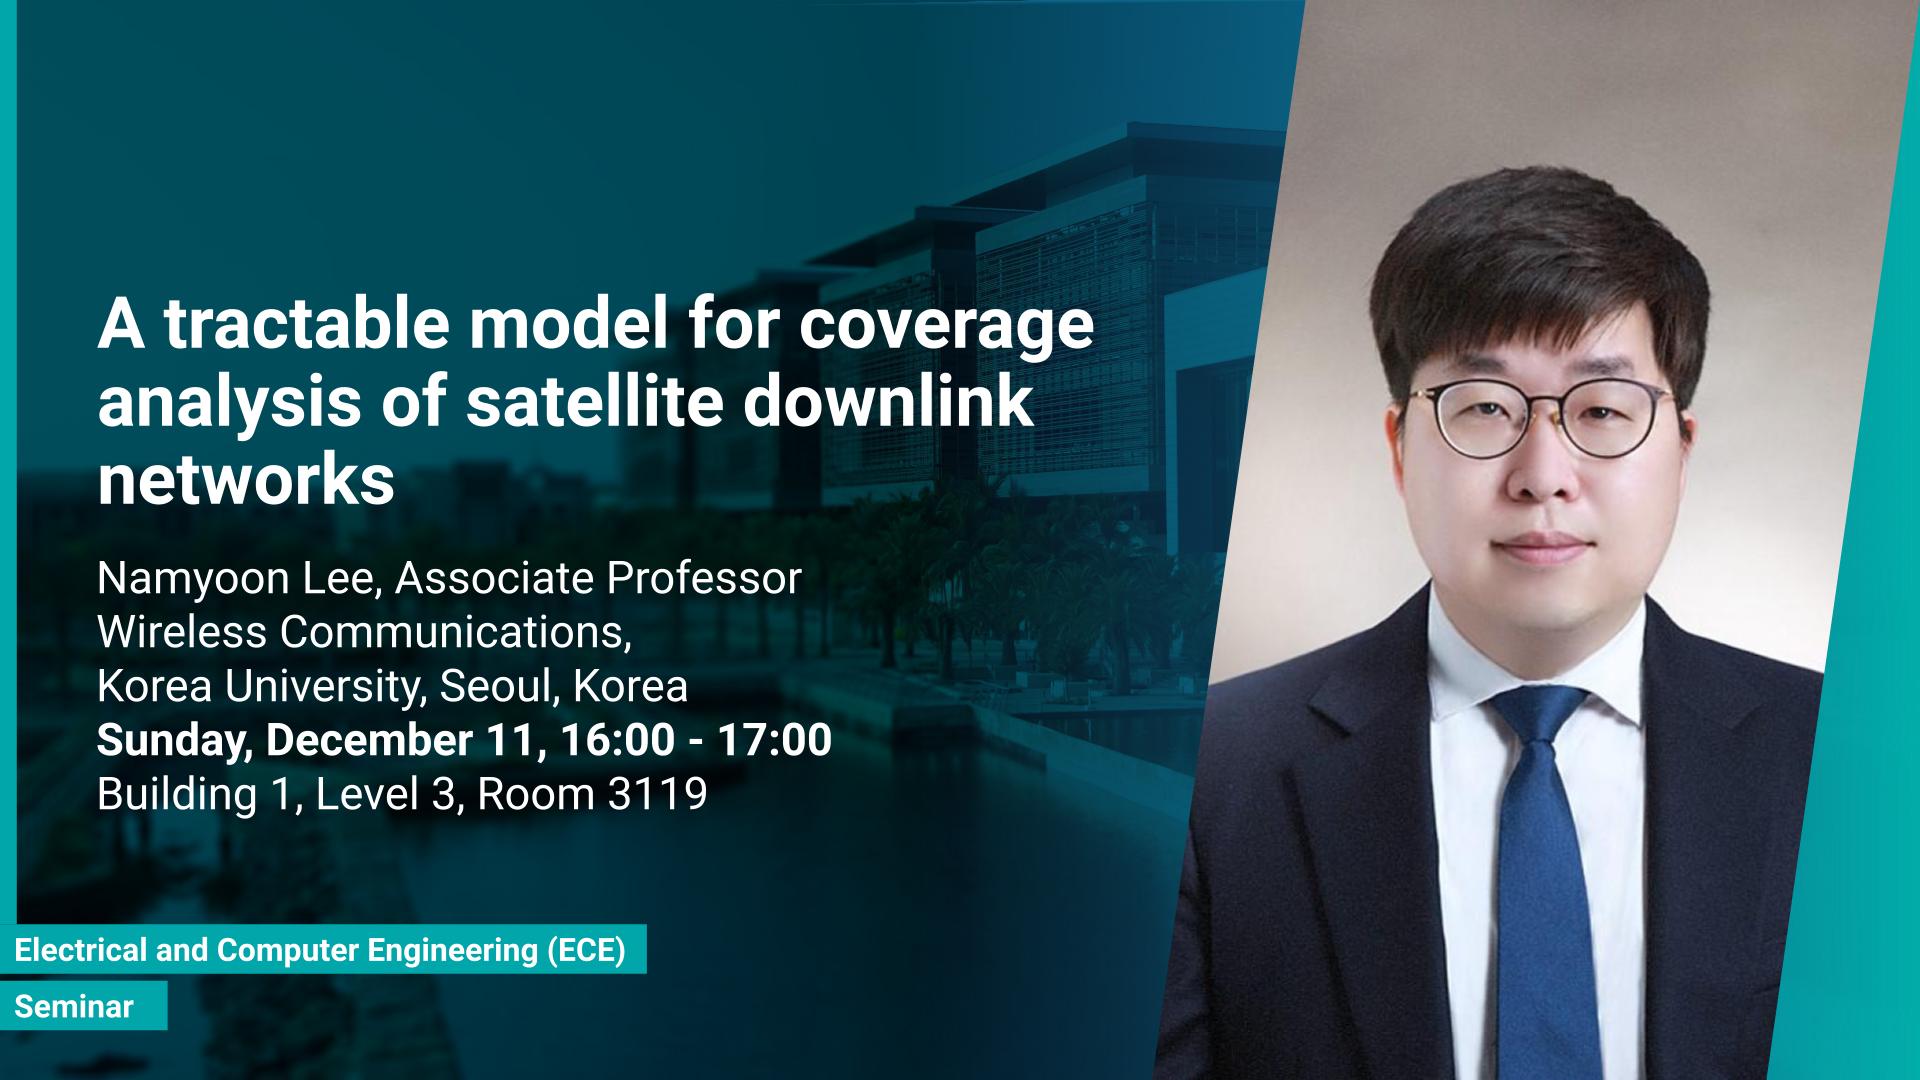 KAUST CEMSE ECE Seminar Namyoon Lee A Tractable Model For Coverage Analysis